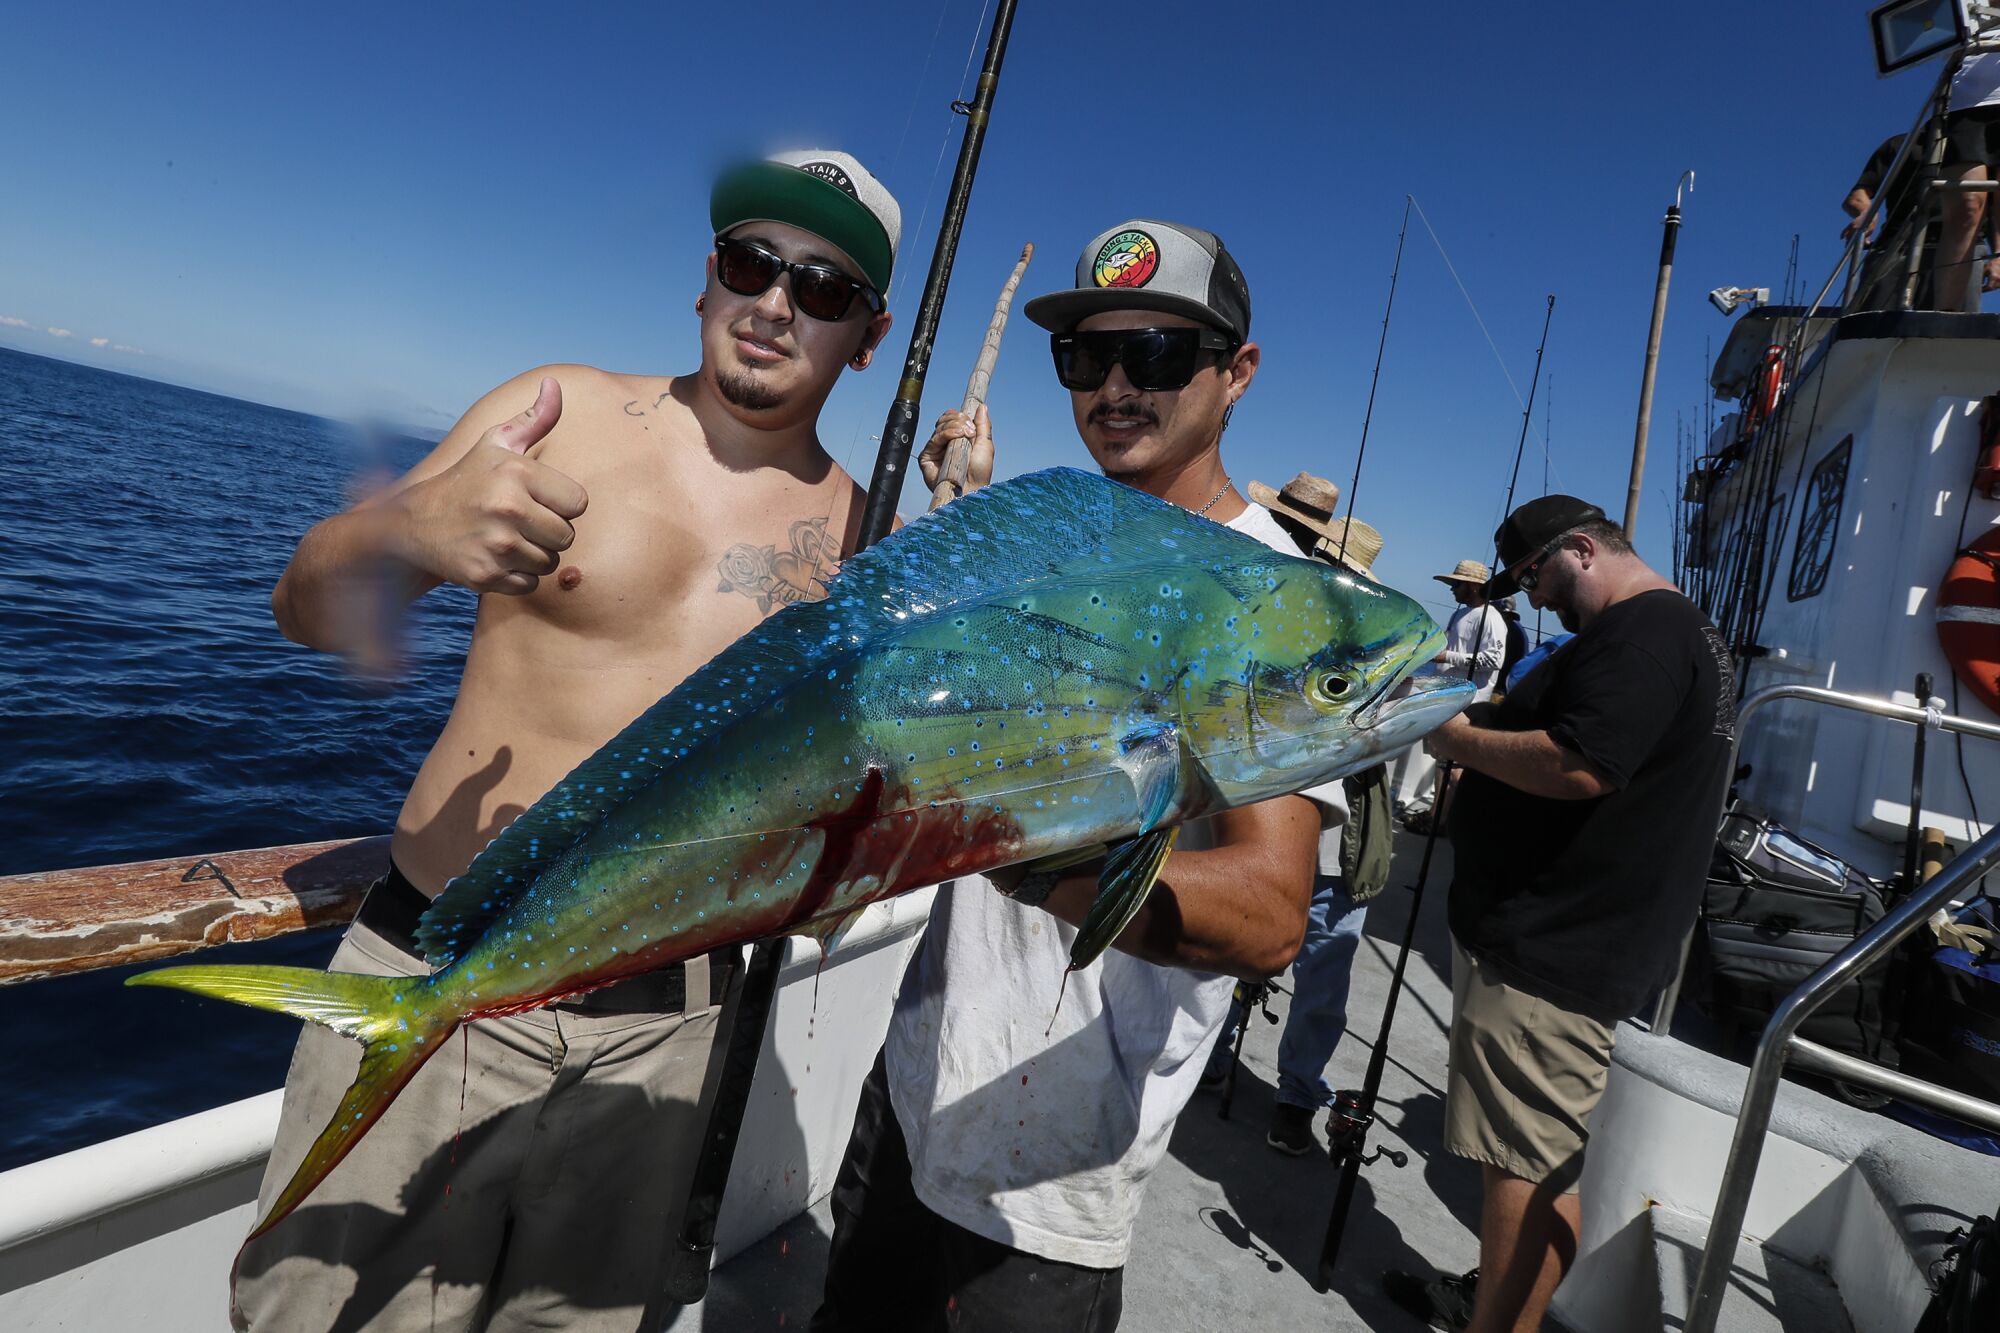 Fisherman Randy Roa shows off his catch with Enterprise fishing boat crew member Easton Ito. 